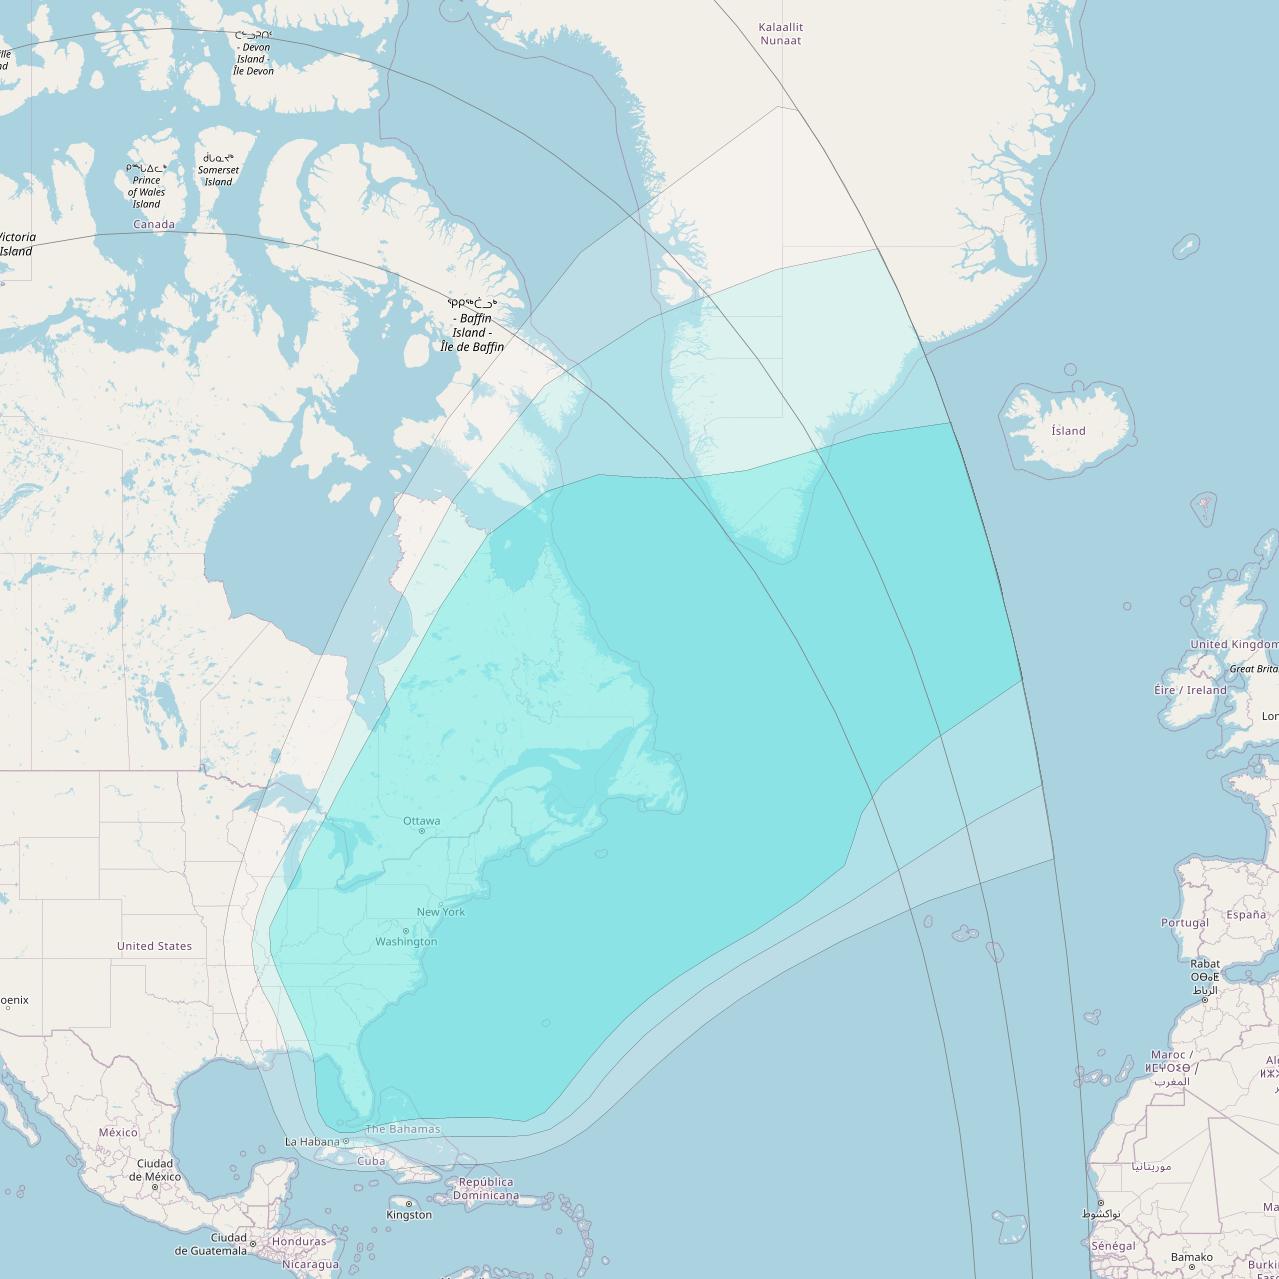 Inmarsat-4F3 at 98° W downlink L-band R007 Regional Spot beam coverage map